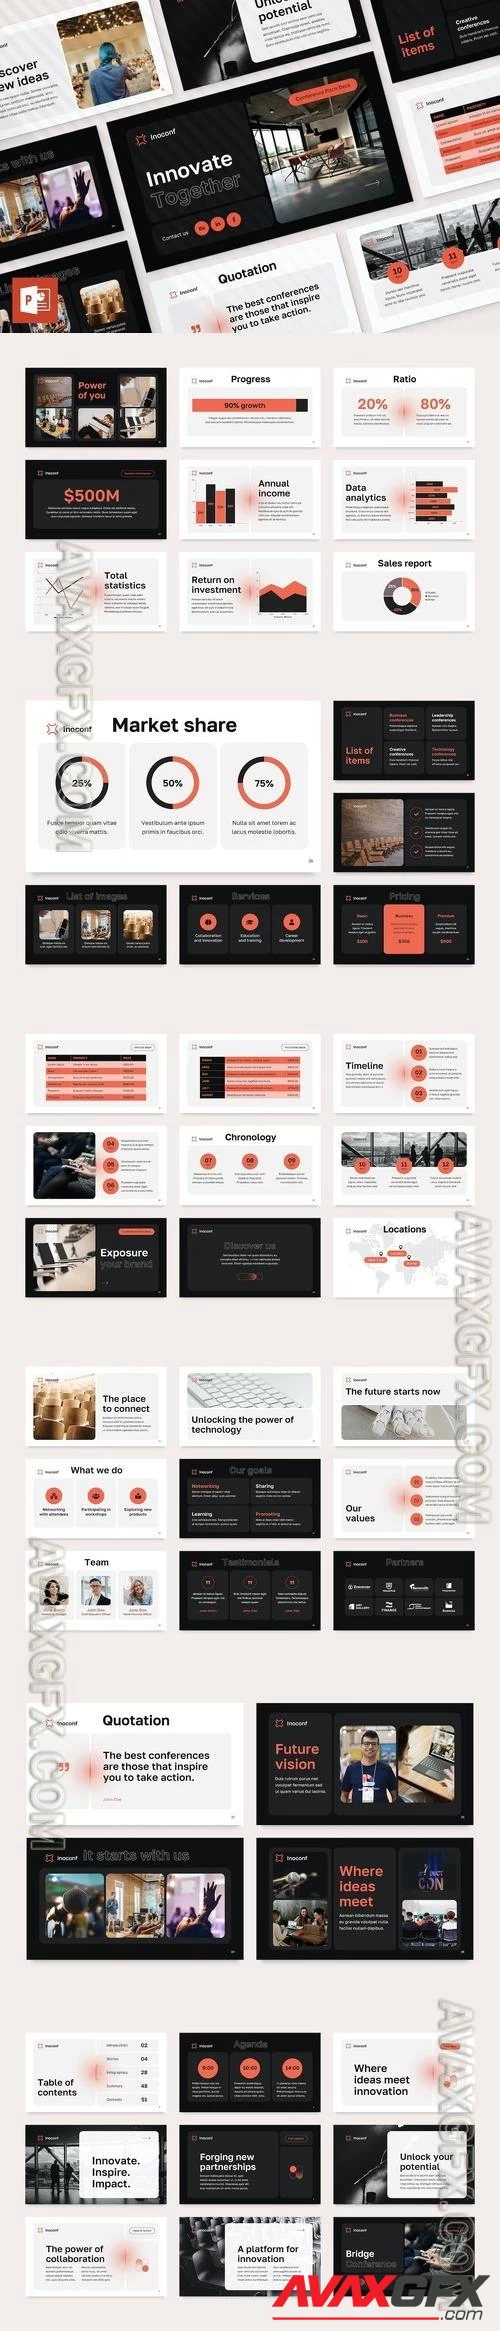 Conference Pitch Deck PowerPoint Template PPTX